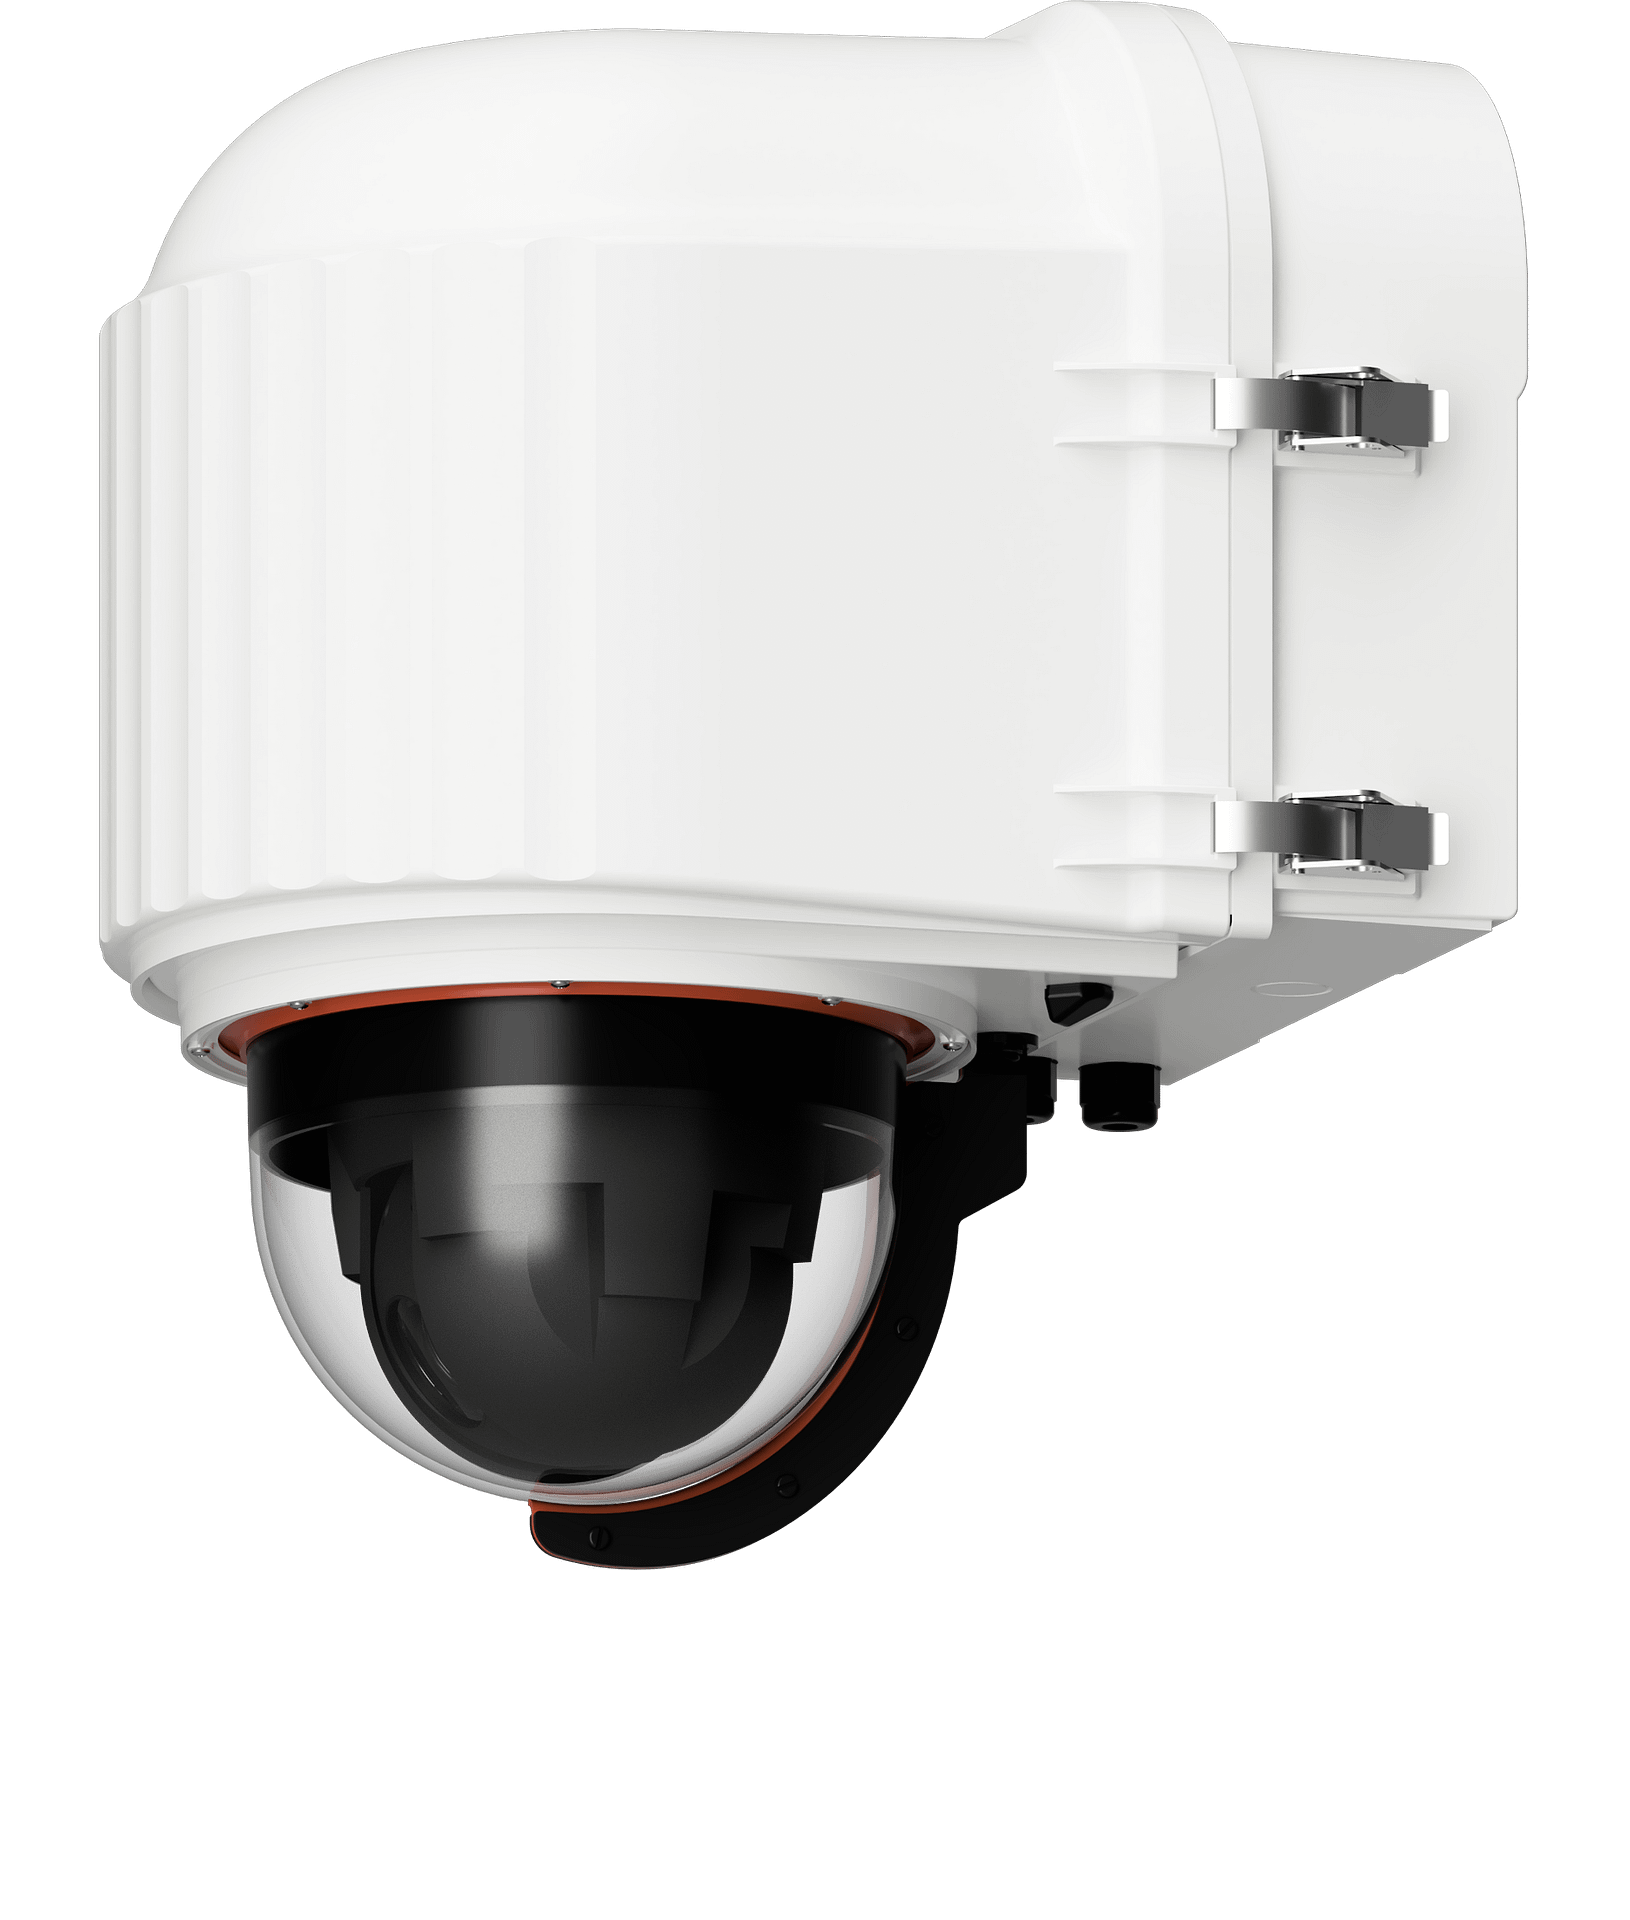 X Stream Designs XClear Self-Cleaning PTZ Camera Enclosure System South East View